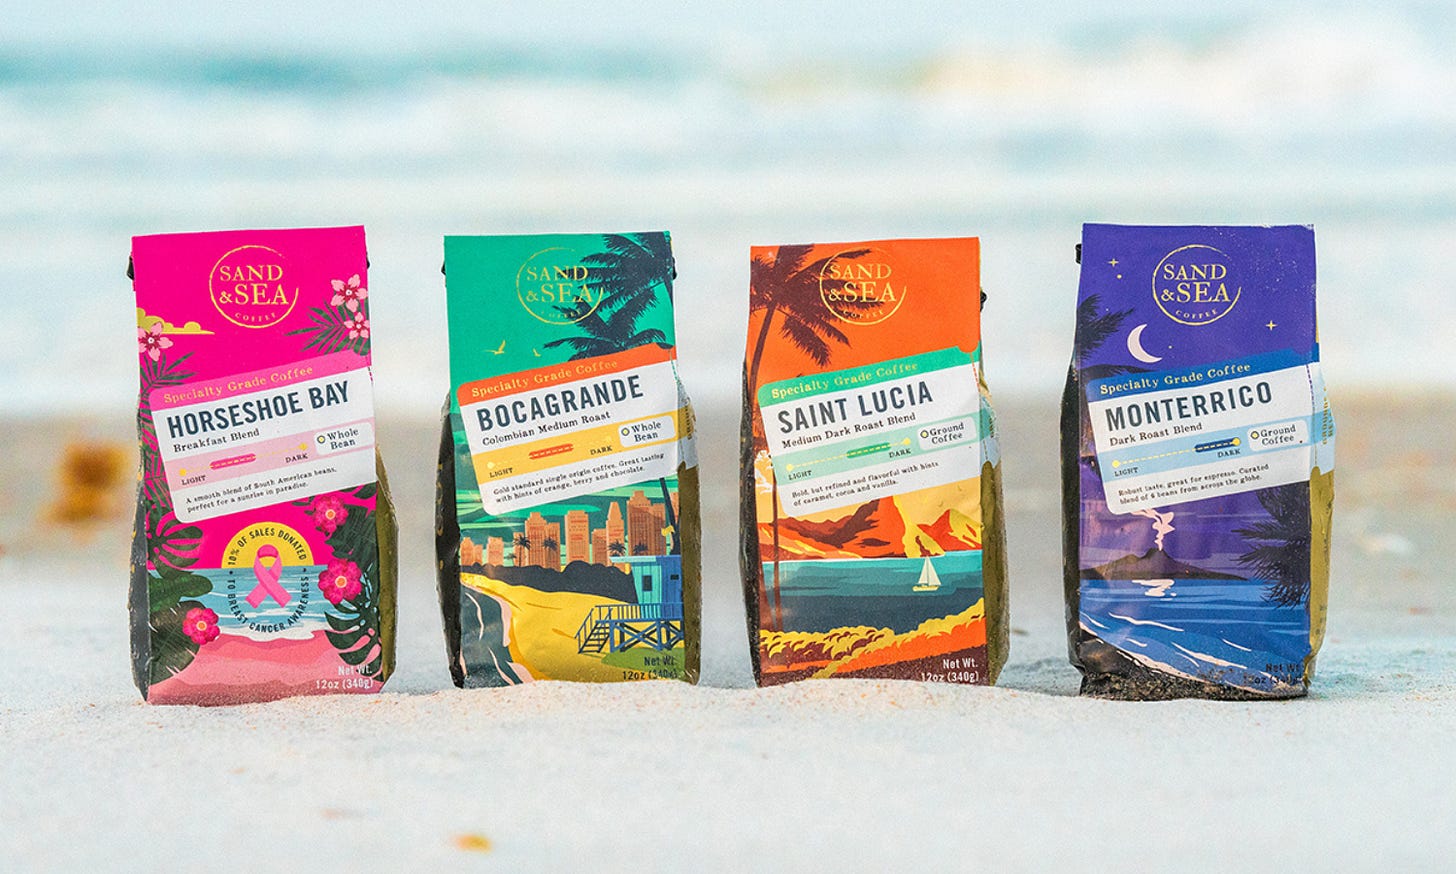 Four colorfully decorated coffee bags rest on the sand with the surf blurred in the background. The bags from left are predominantly pink, green, orange, and purple.